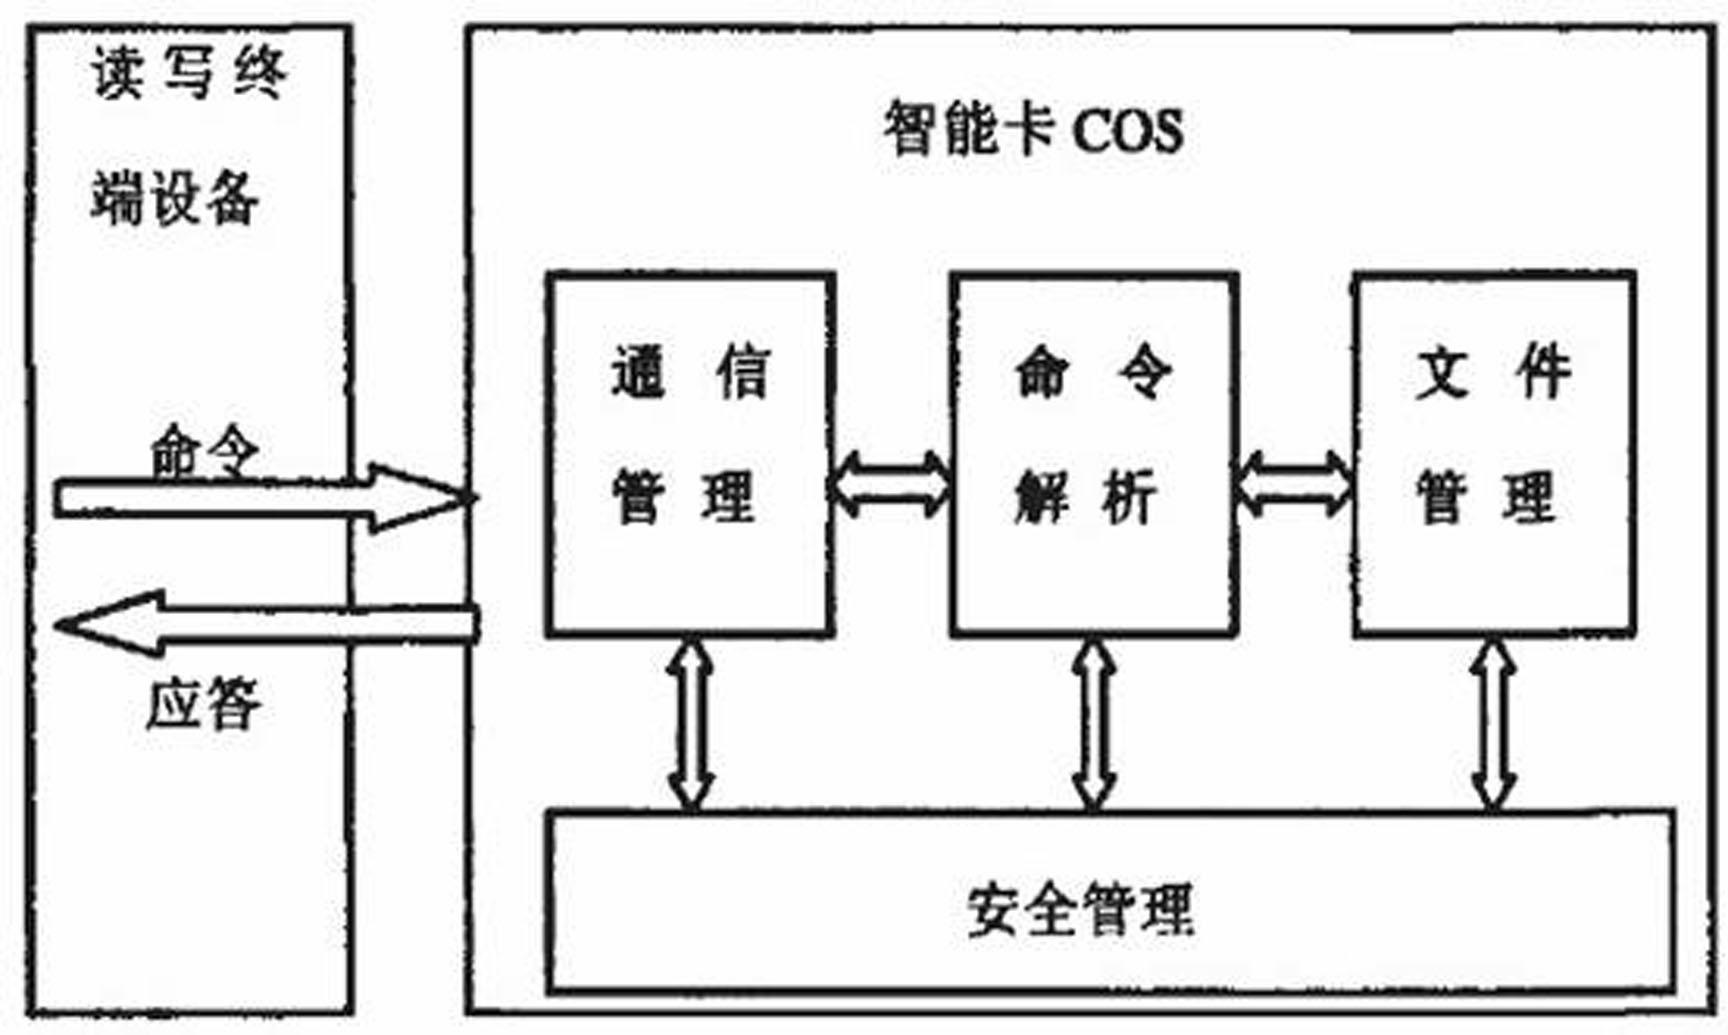 Method for realizing chip operating system (COS) safety mechanism of intelligent card